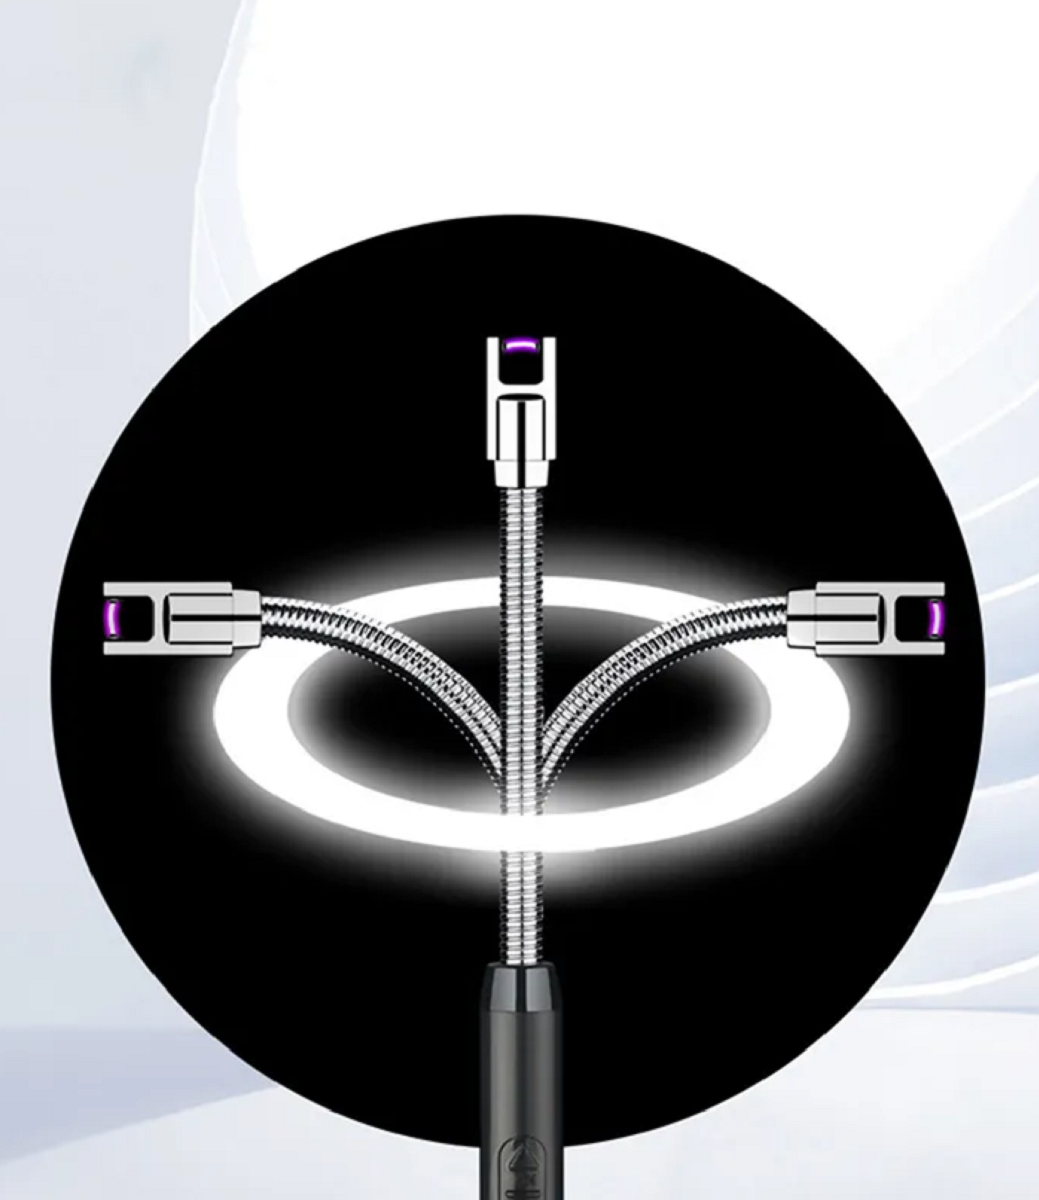 Two flexible, silver USB charging SI-25551 FLAMELESS ELECTRIC RECHARGEABLE LIGHTER cables with glowing purple connectors forming a loop on a stylized background.